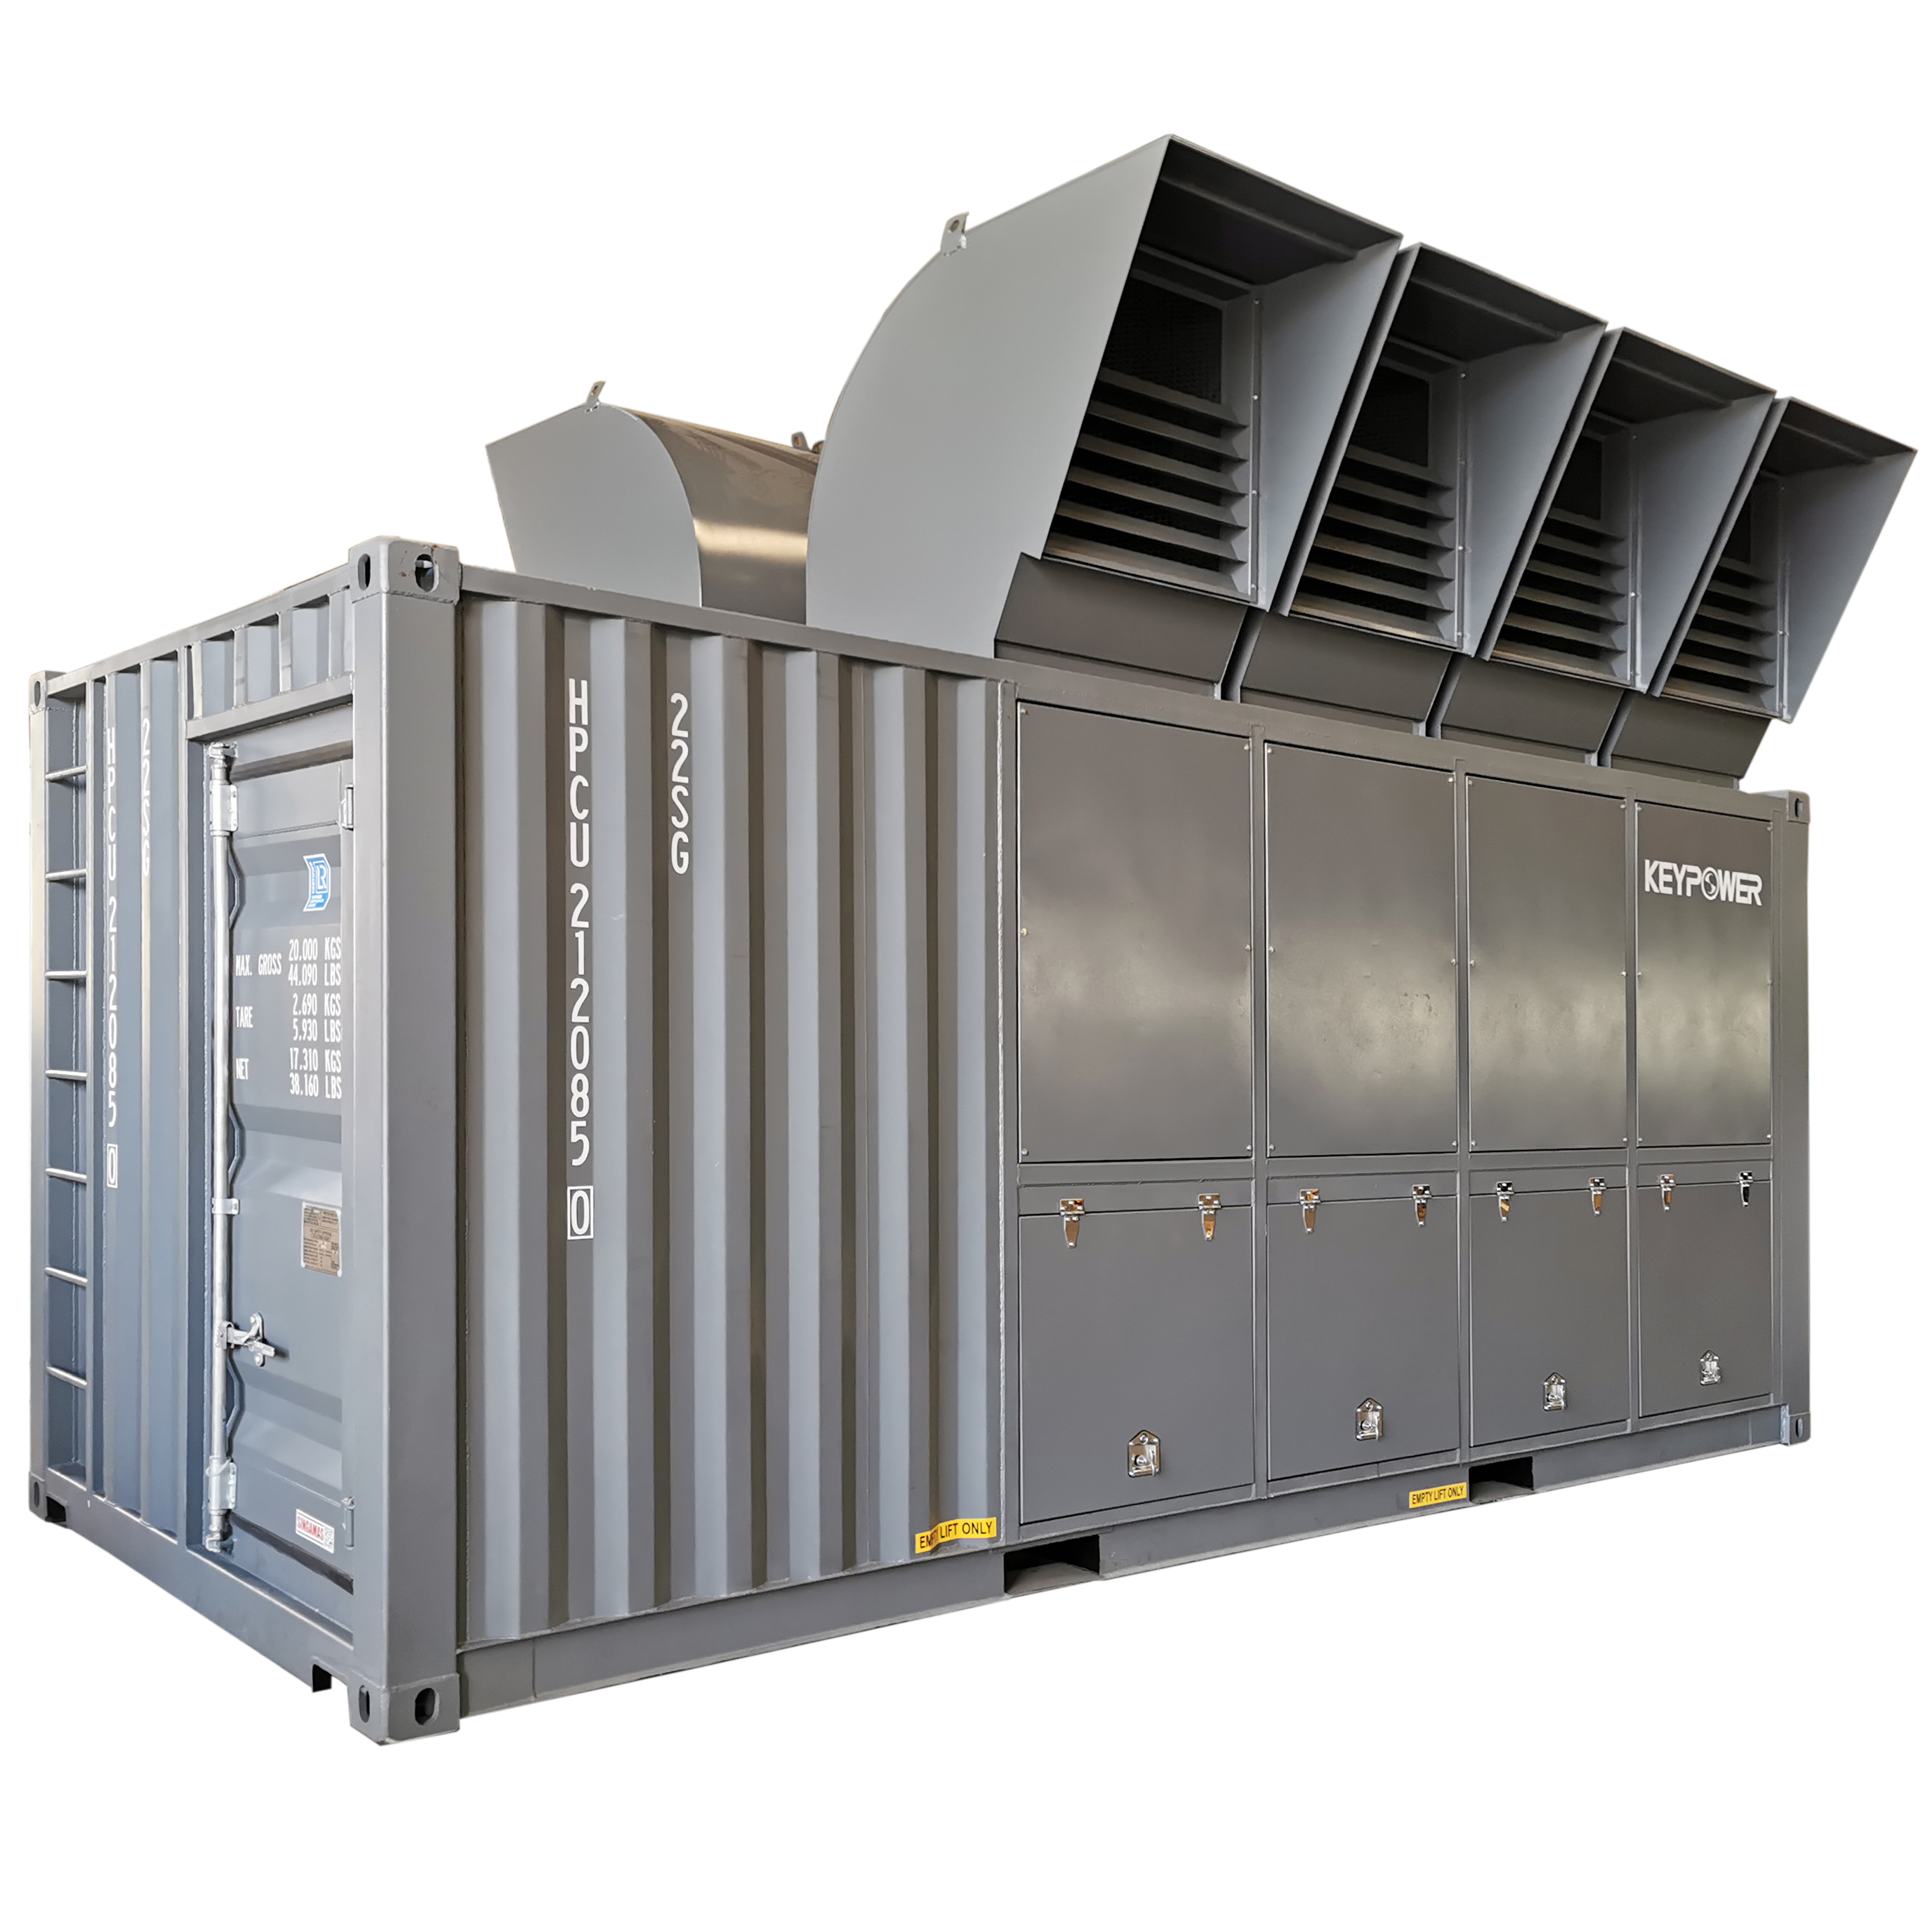 Hot New Products Ac Dummy Load - KEYPOWER 2400kW Resistive Load Bank For Generator Testing – Gff Keypower